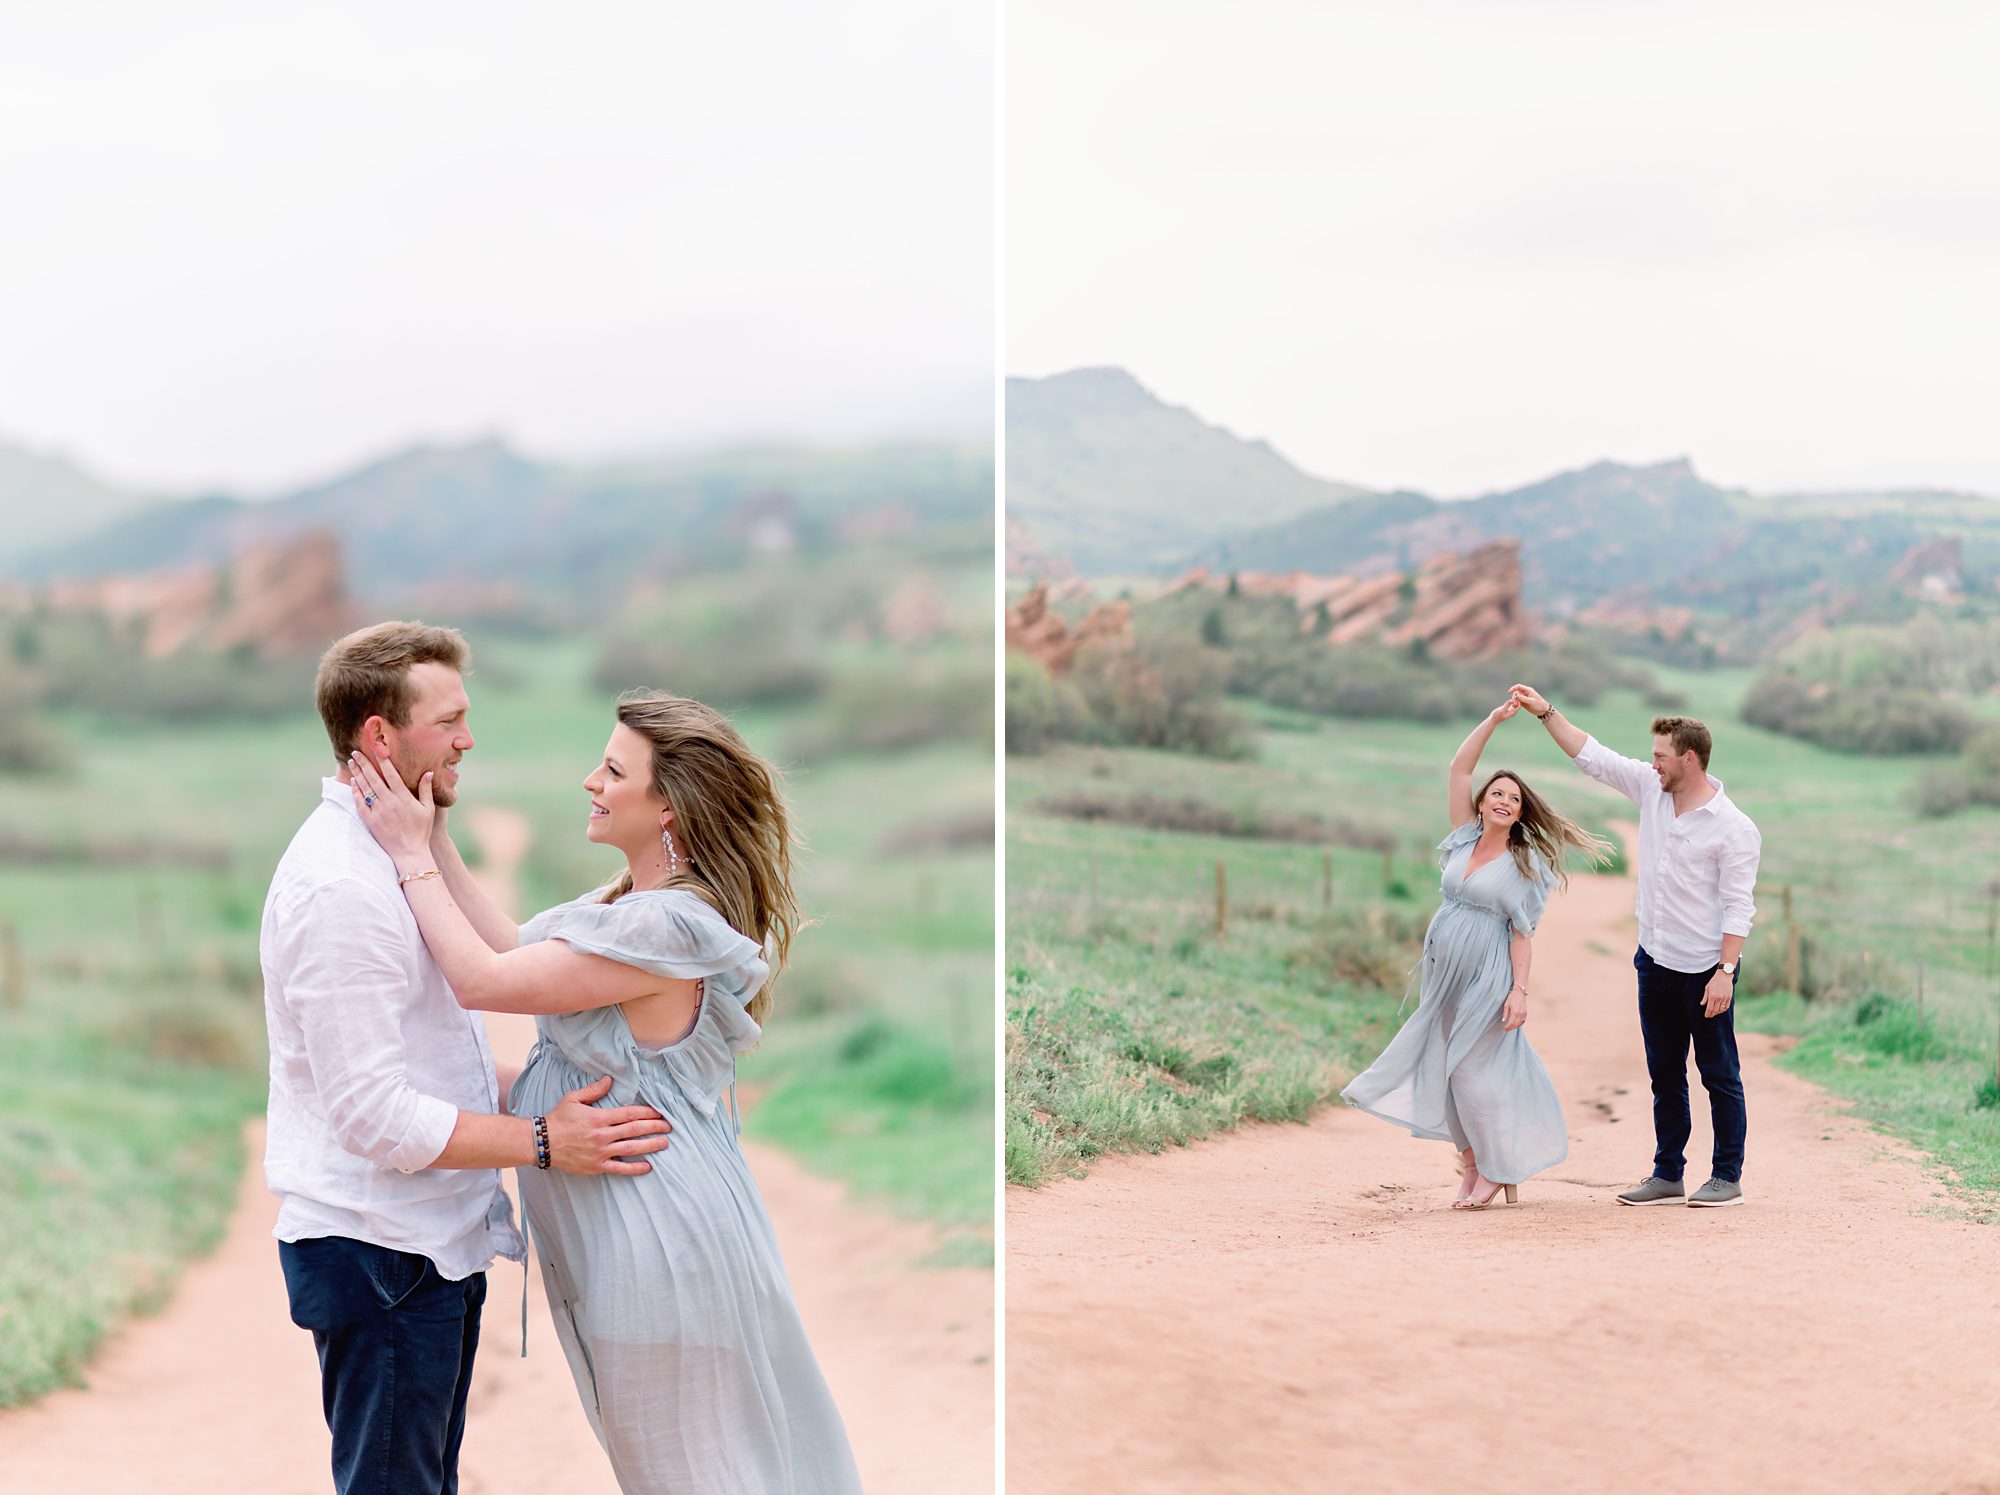 A husband and wife get maternity photos done with their dogs at scenic South Valley Park in Denver Colorado, and will soon welcome their first child.